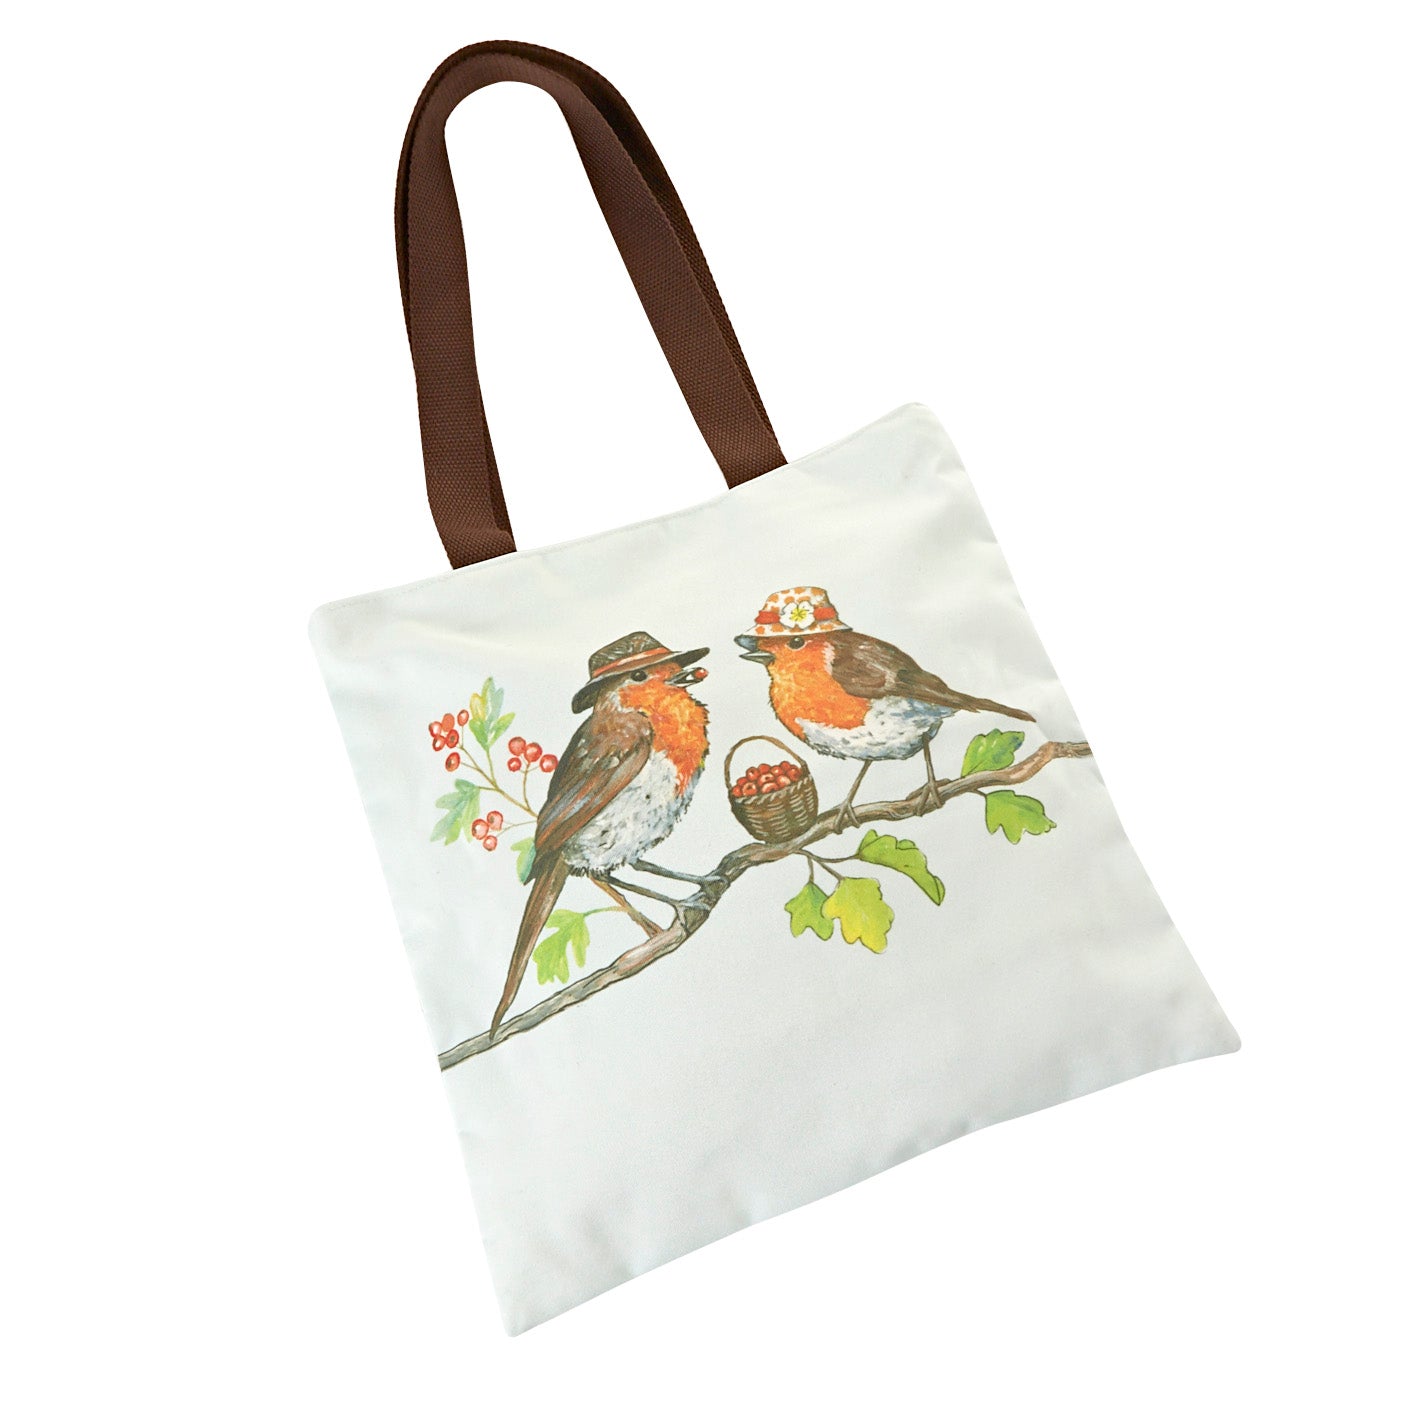 The Two Robins Tote Bag